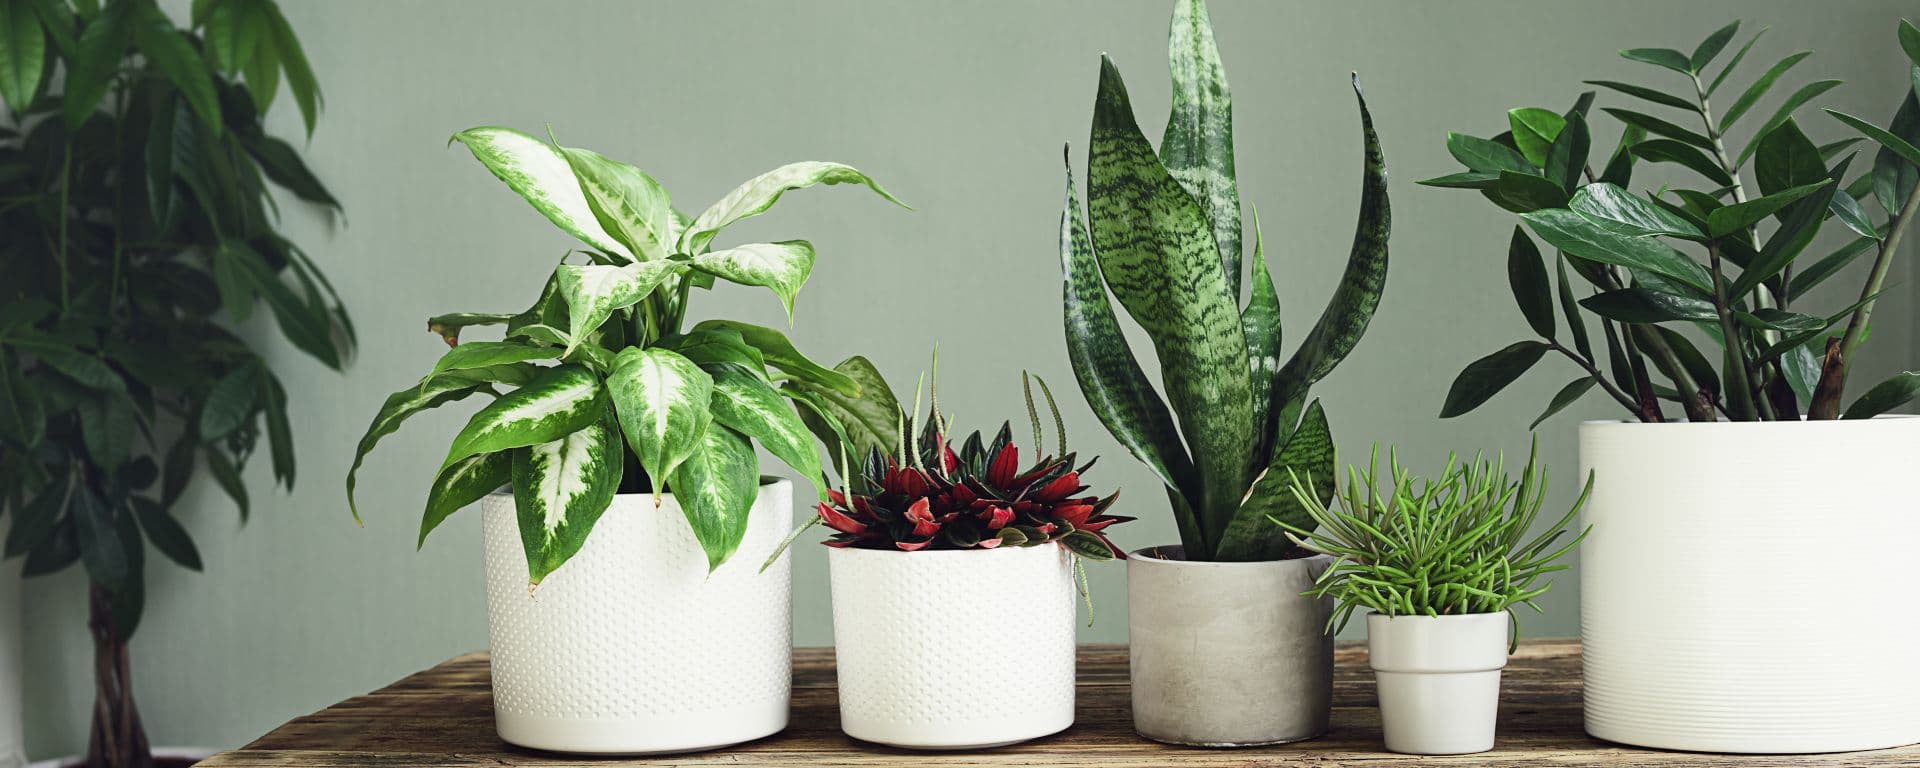 A variety of house plants on a wooden table; indoor garden concept.